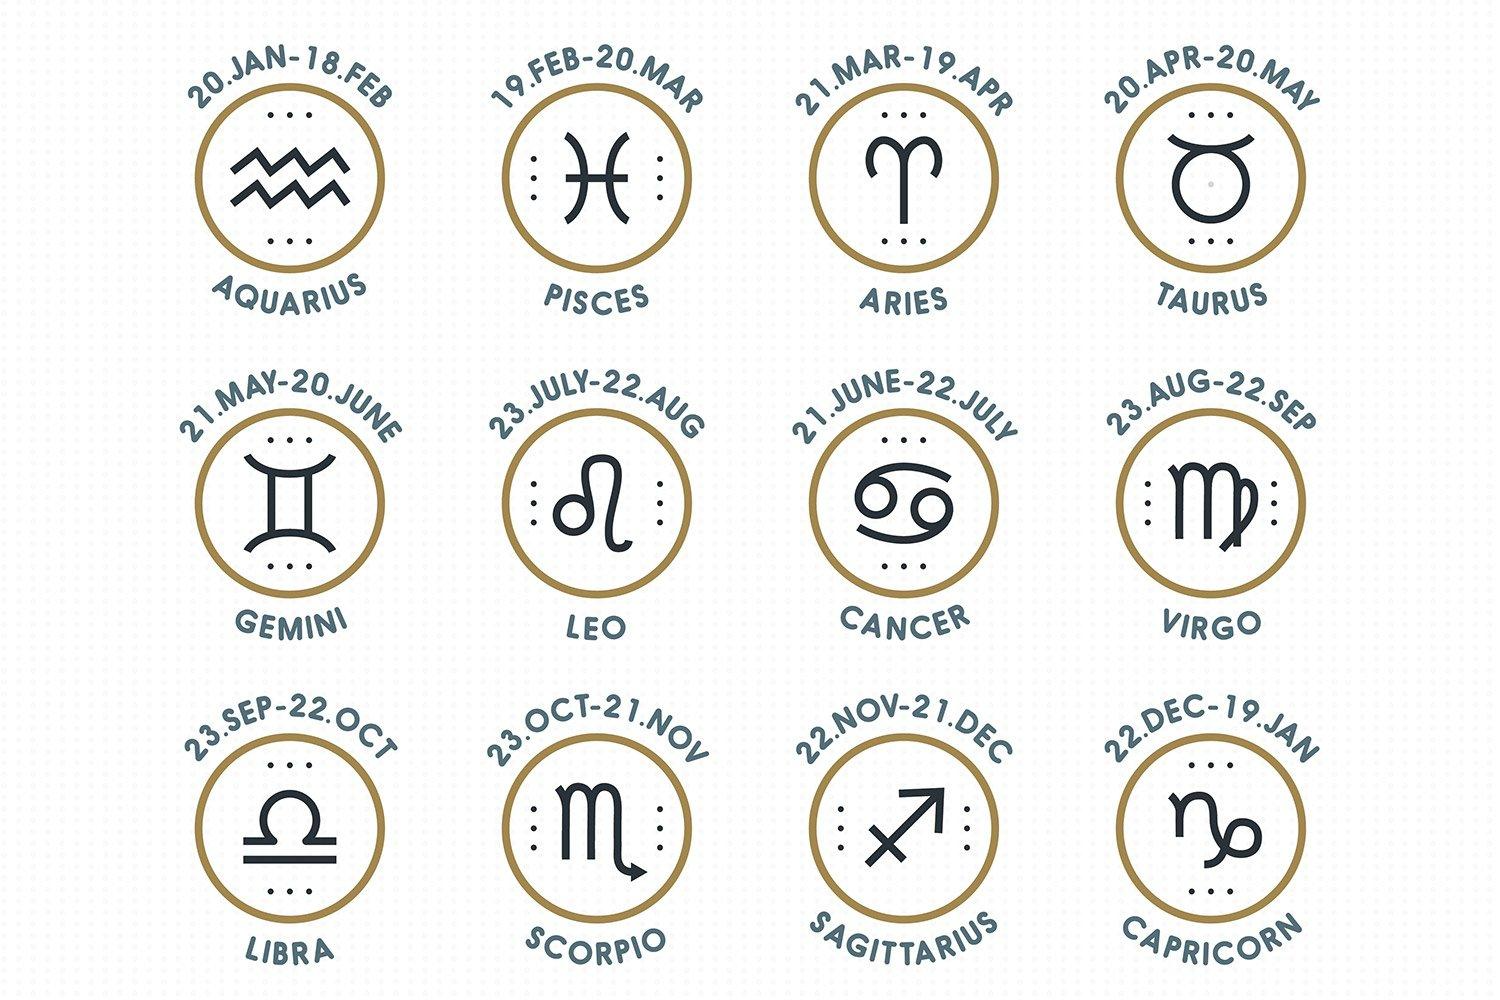 daily horoscope for september 29 astrological prediction for zodiac signs